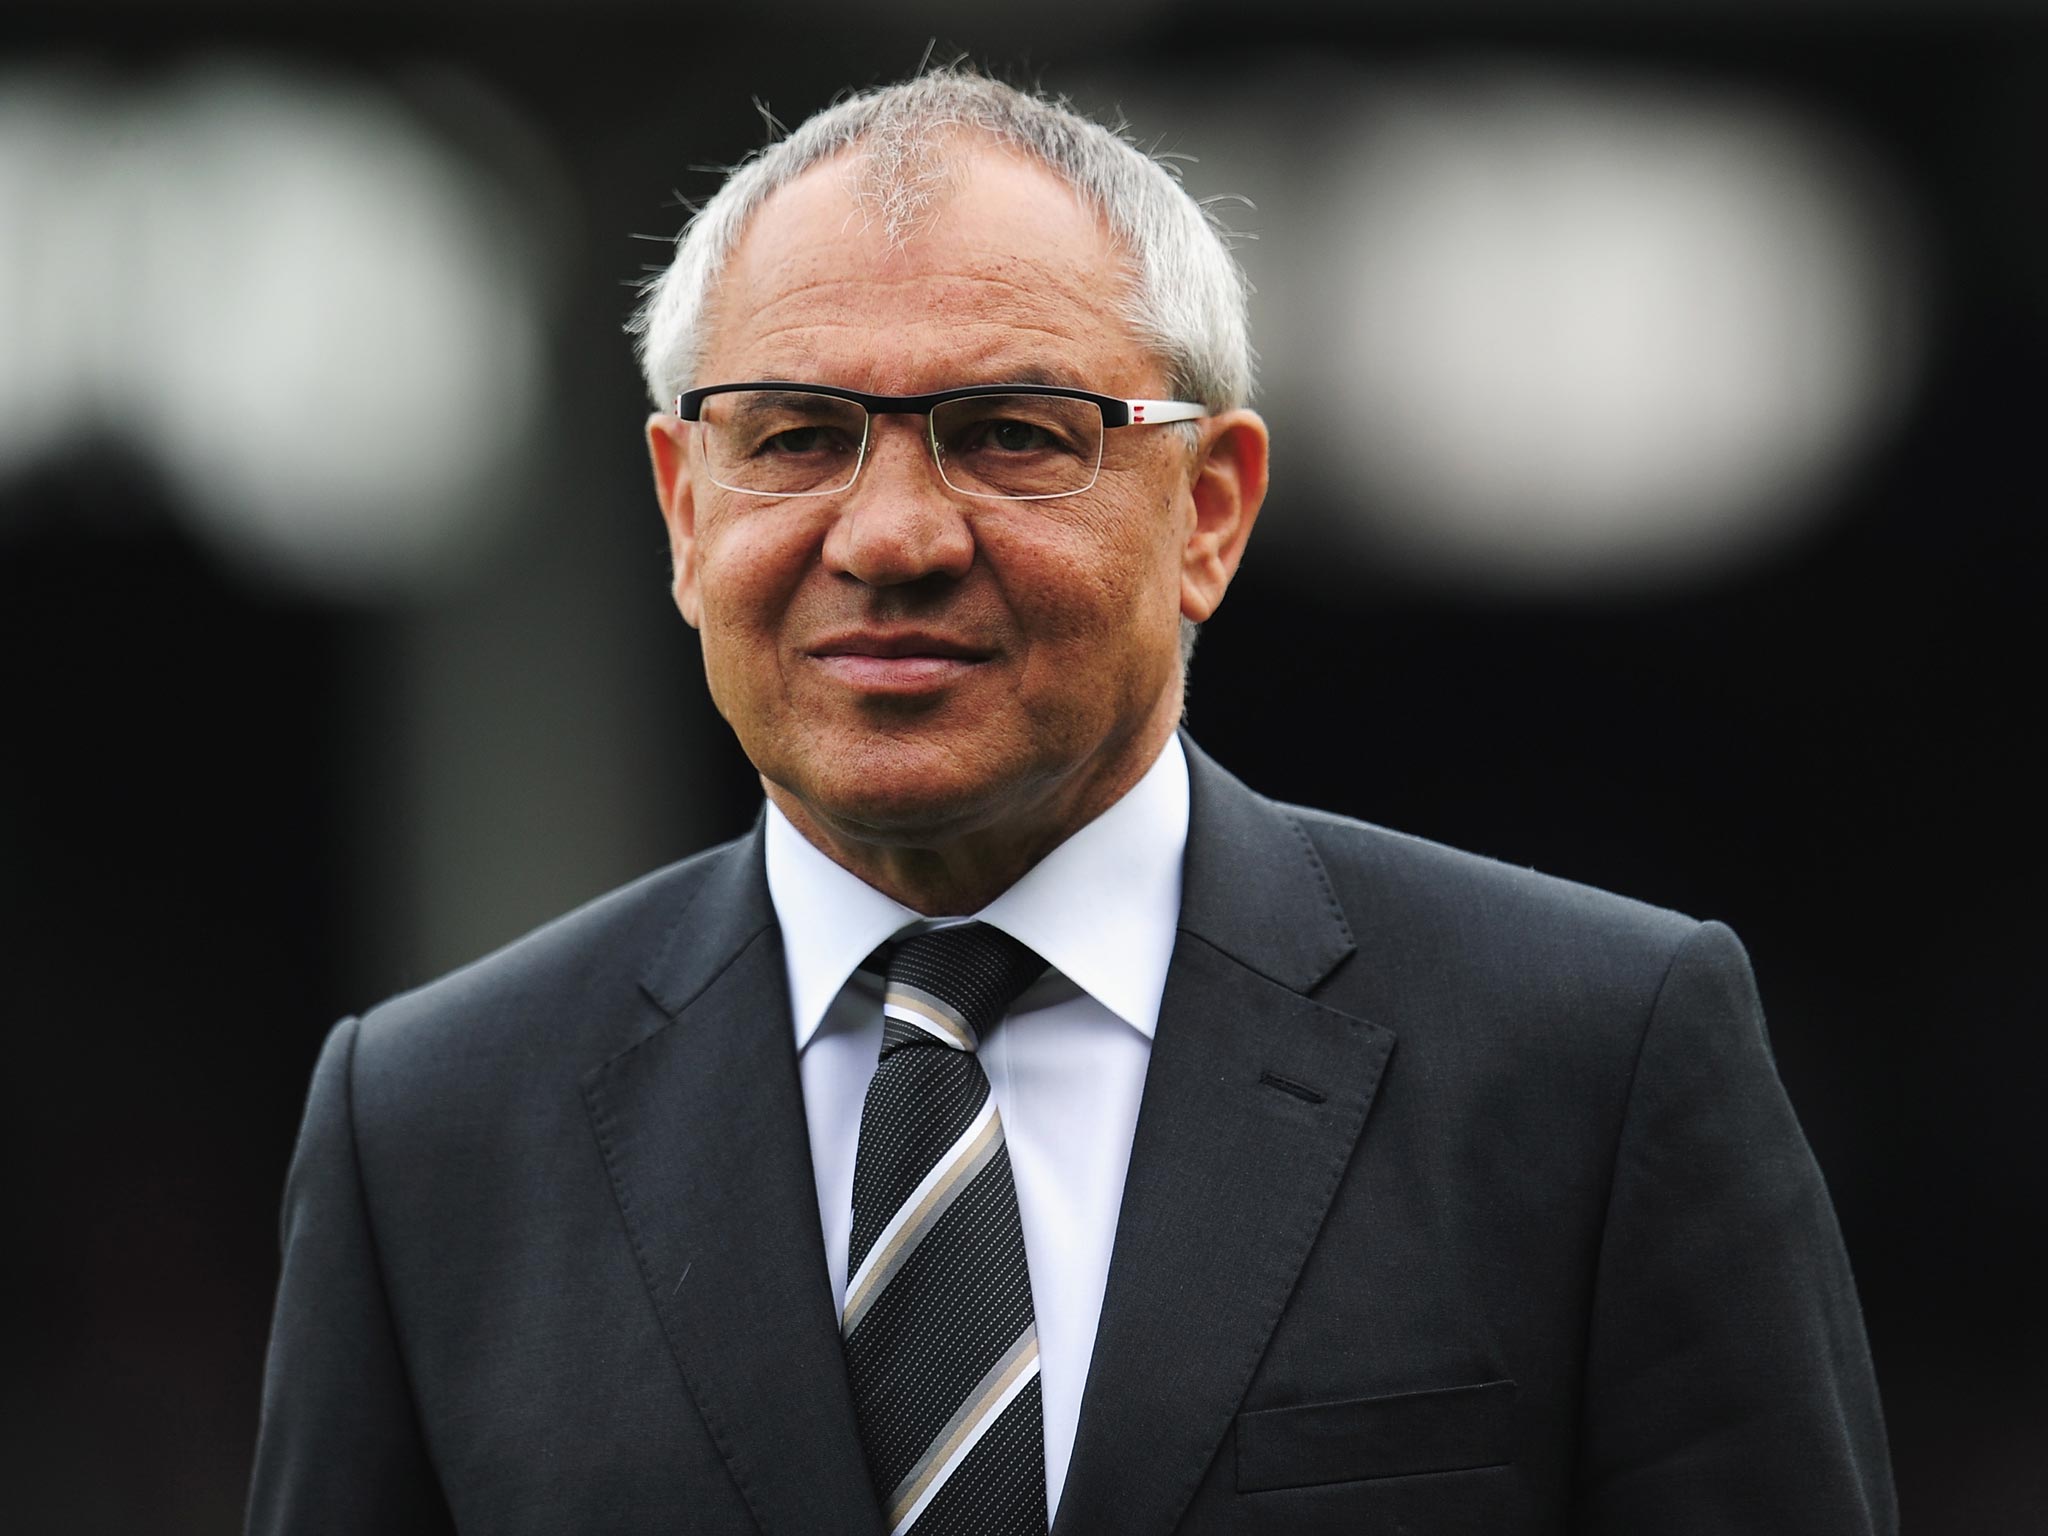 Fulham manager Felix Magath has refused to accept that his side are consigned to relegation despite their latest defeat to Everton